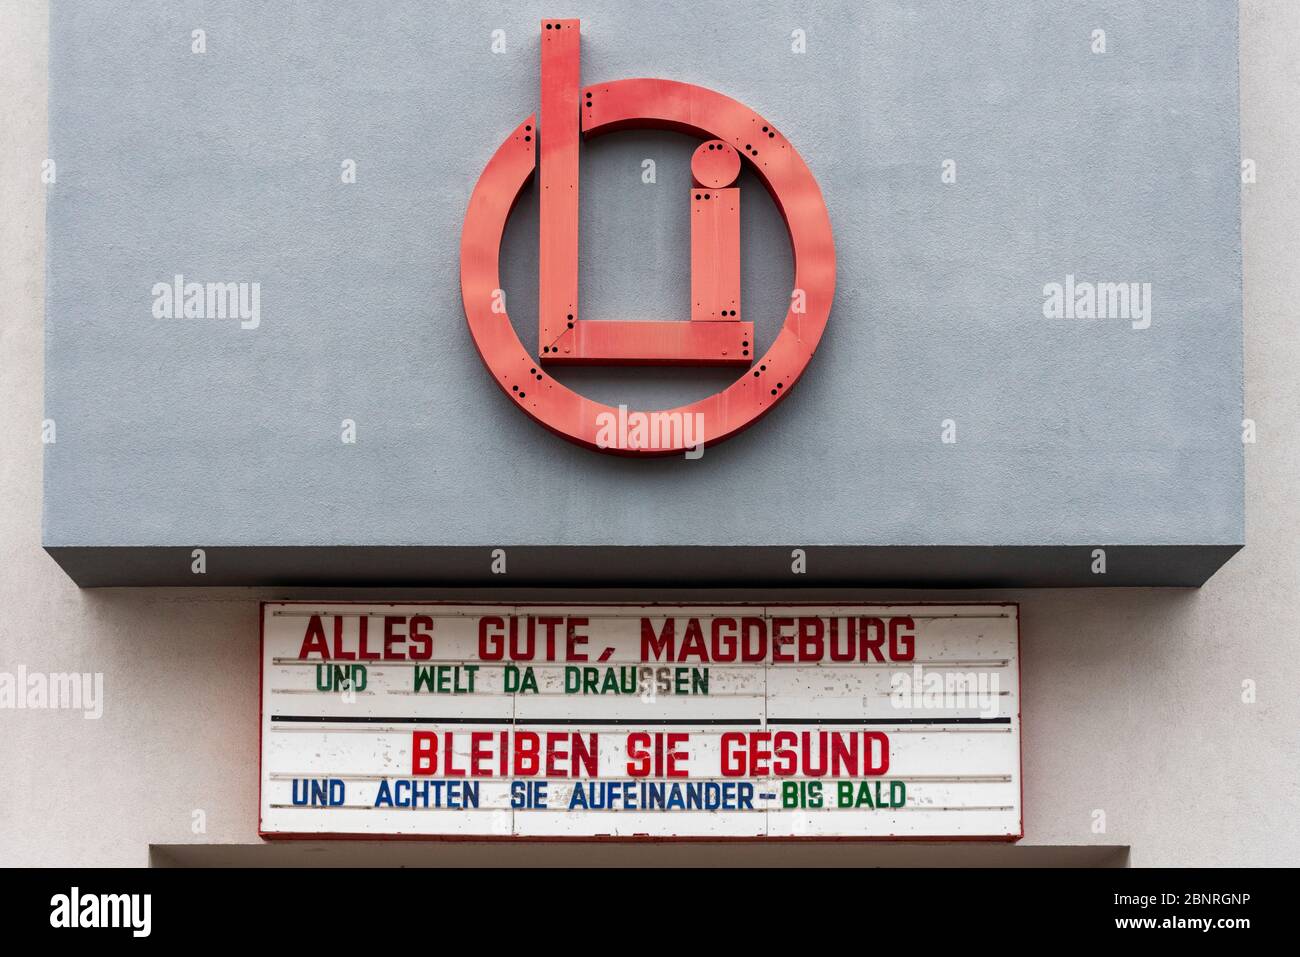 Germany, Saxony-Anhalt, Magdeburg: Due to the corona pandemic, the traditional “Oli-Lichtspiele” cinema in Magdeburg is closing. On the scoreboard is the lettering: Stay healthy and take care of each other - see you soon. ' Stock Photo